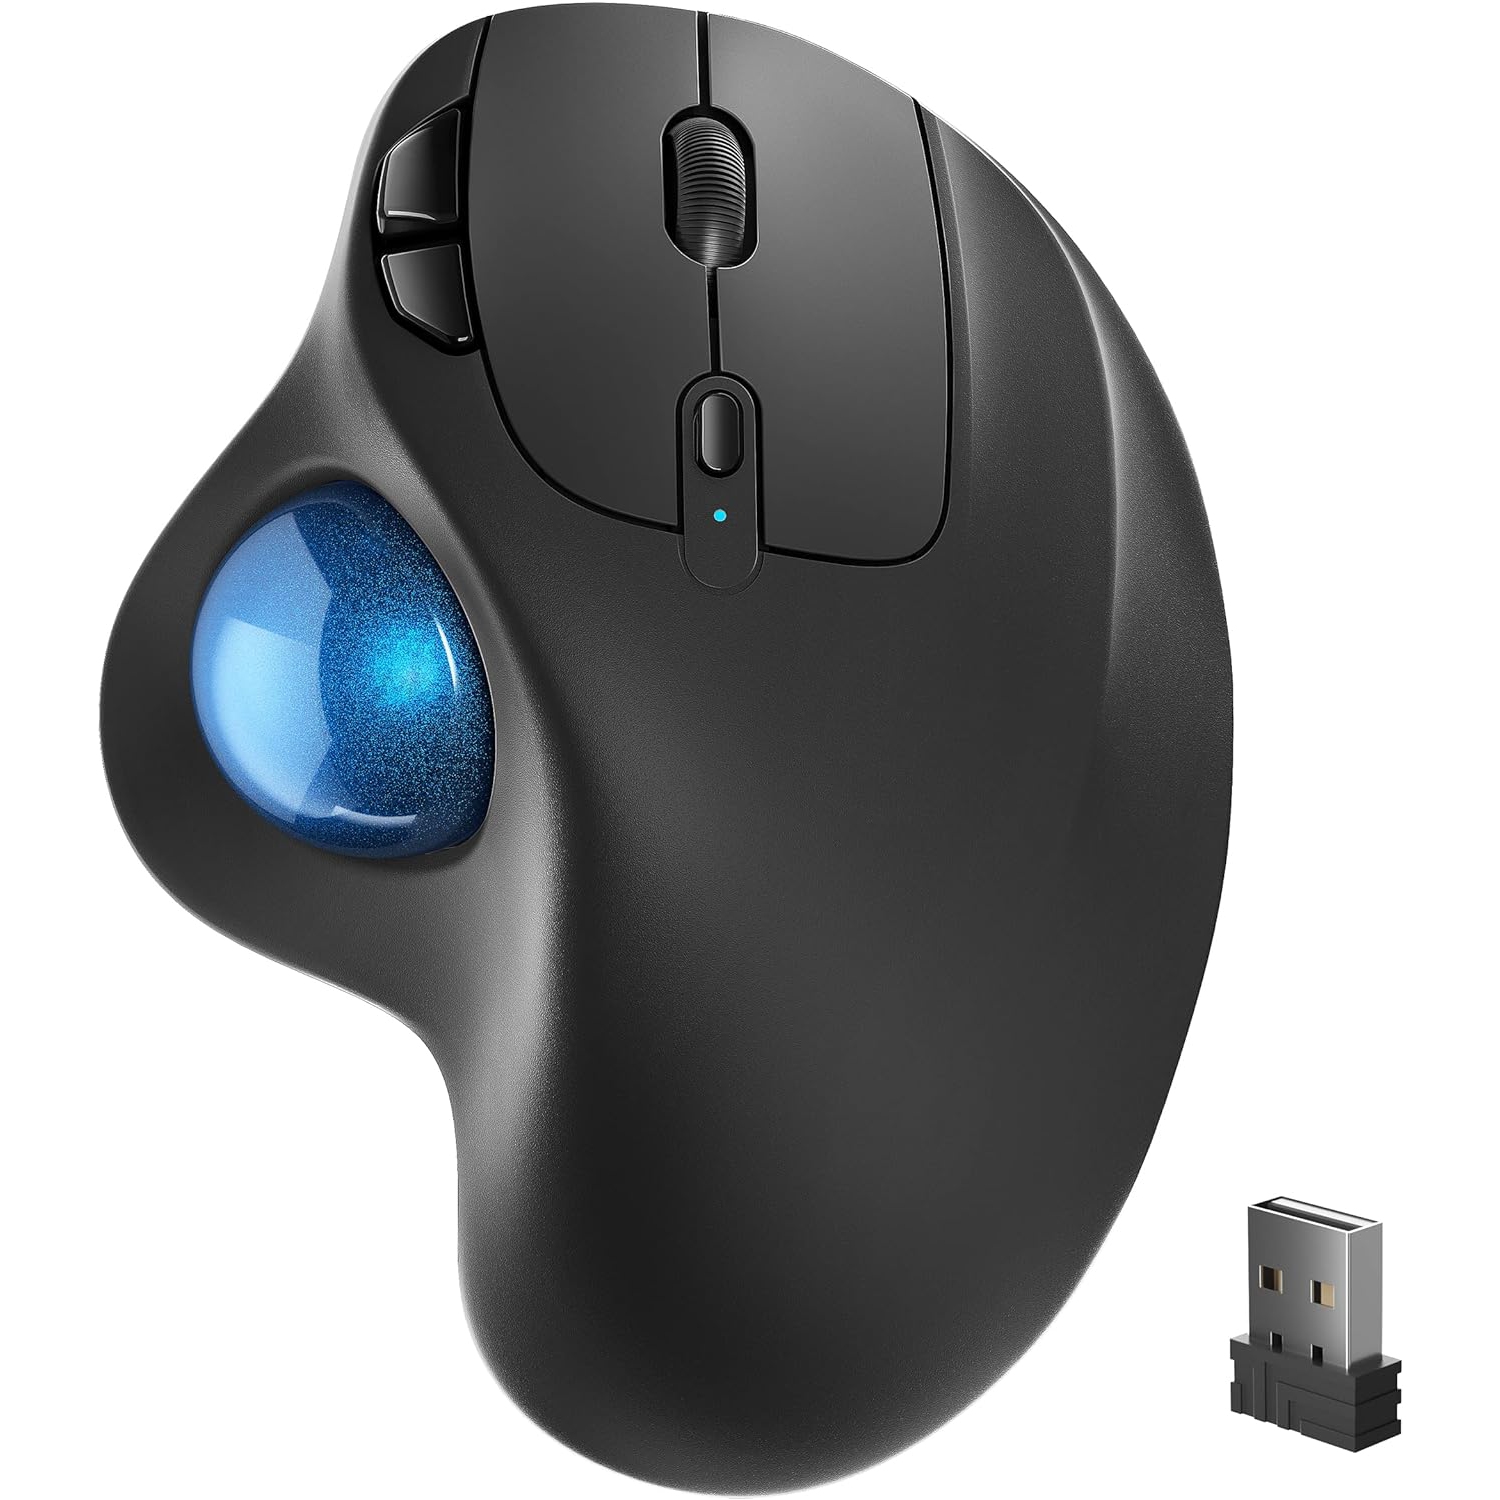 Wireless Trackball Mouse, Rechargeable Ergonomic Mouse, Easy Thumb Control, Precise & Smooth Tracking, 3 Device Connection (Bluetooth or USB), Compatible for PC, Laptop, iPad, Mac